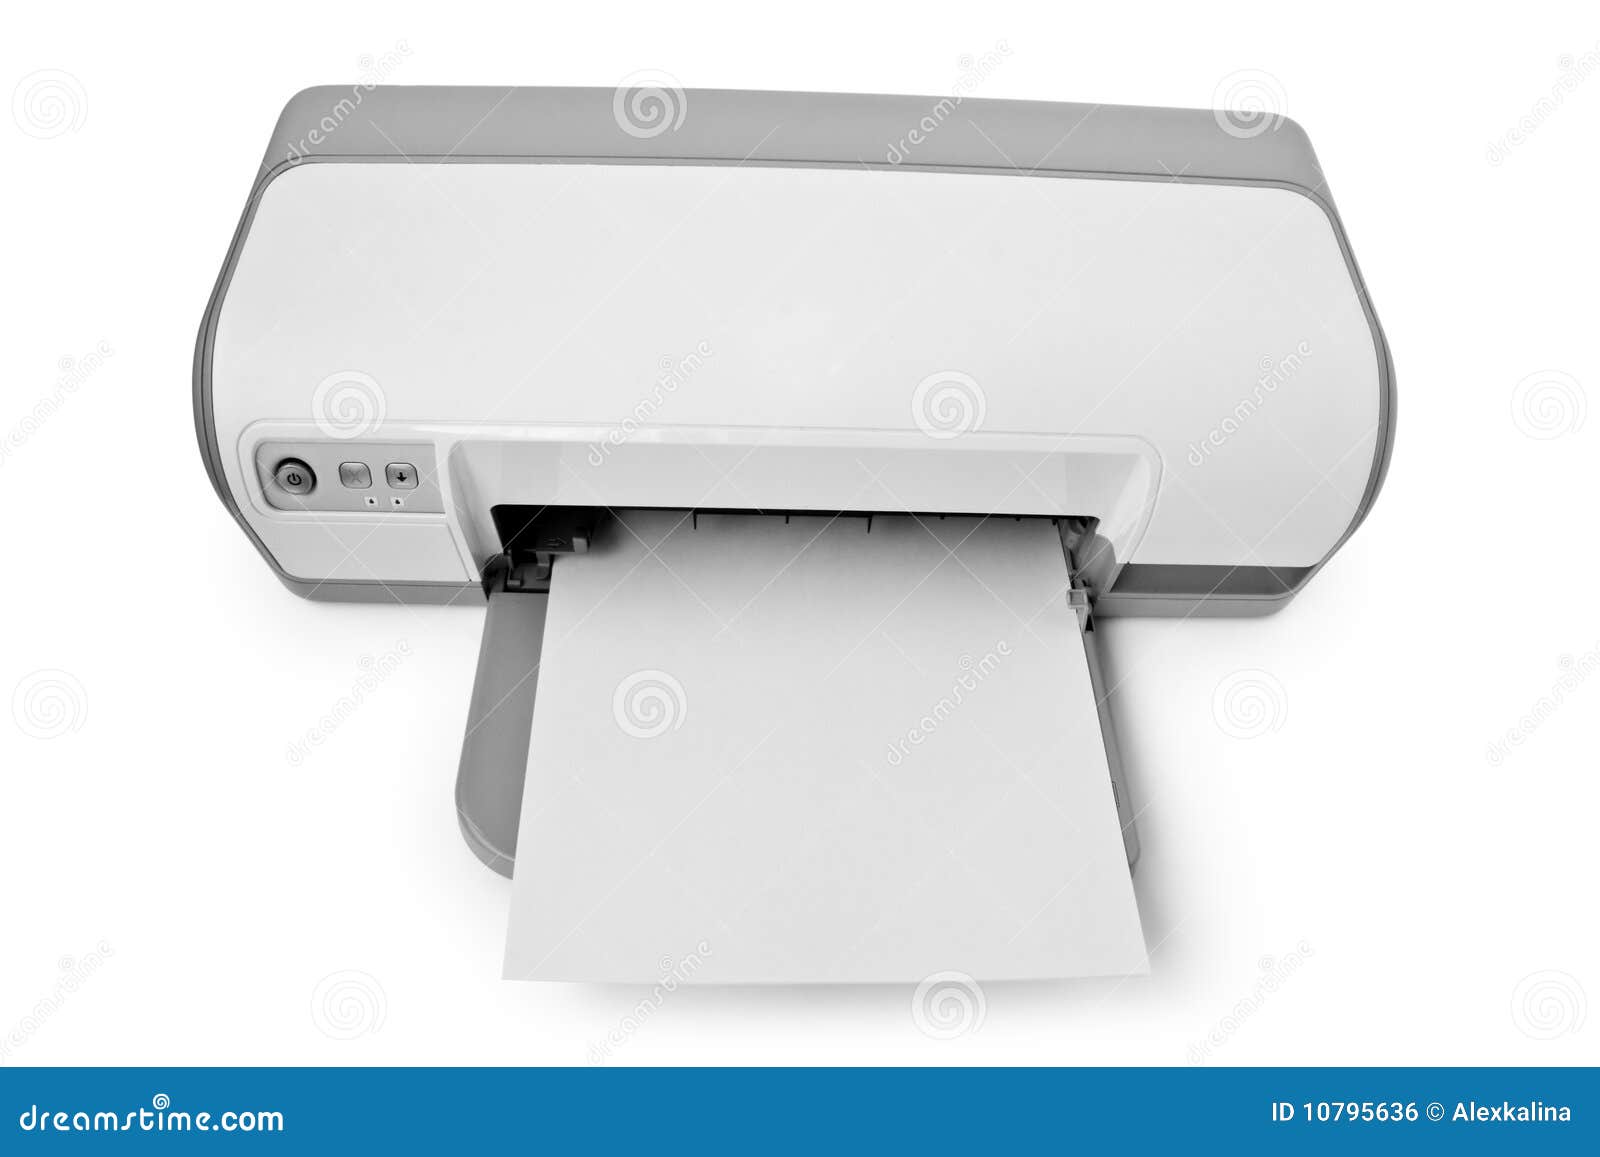 White printer paper on white surface photo – Free Copy space Image